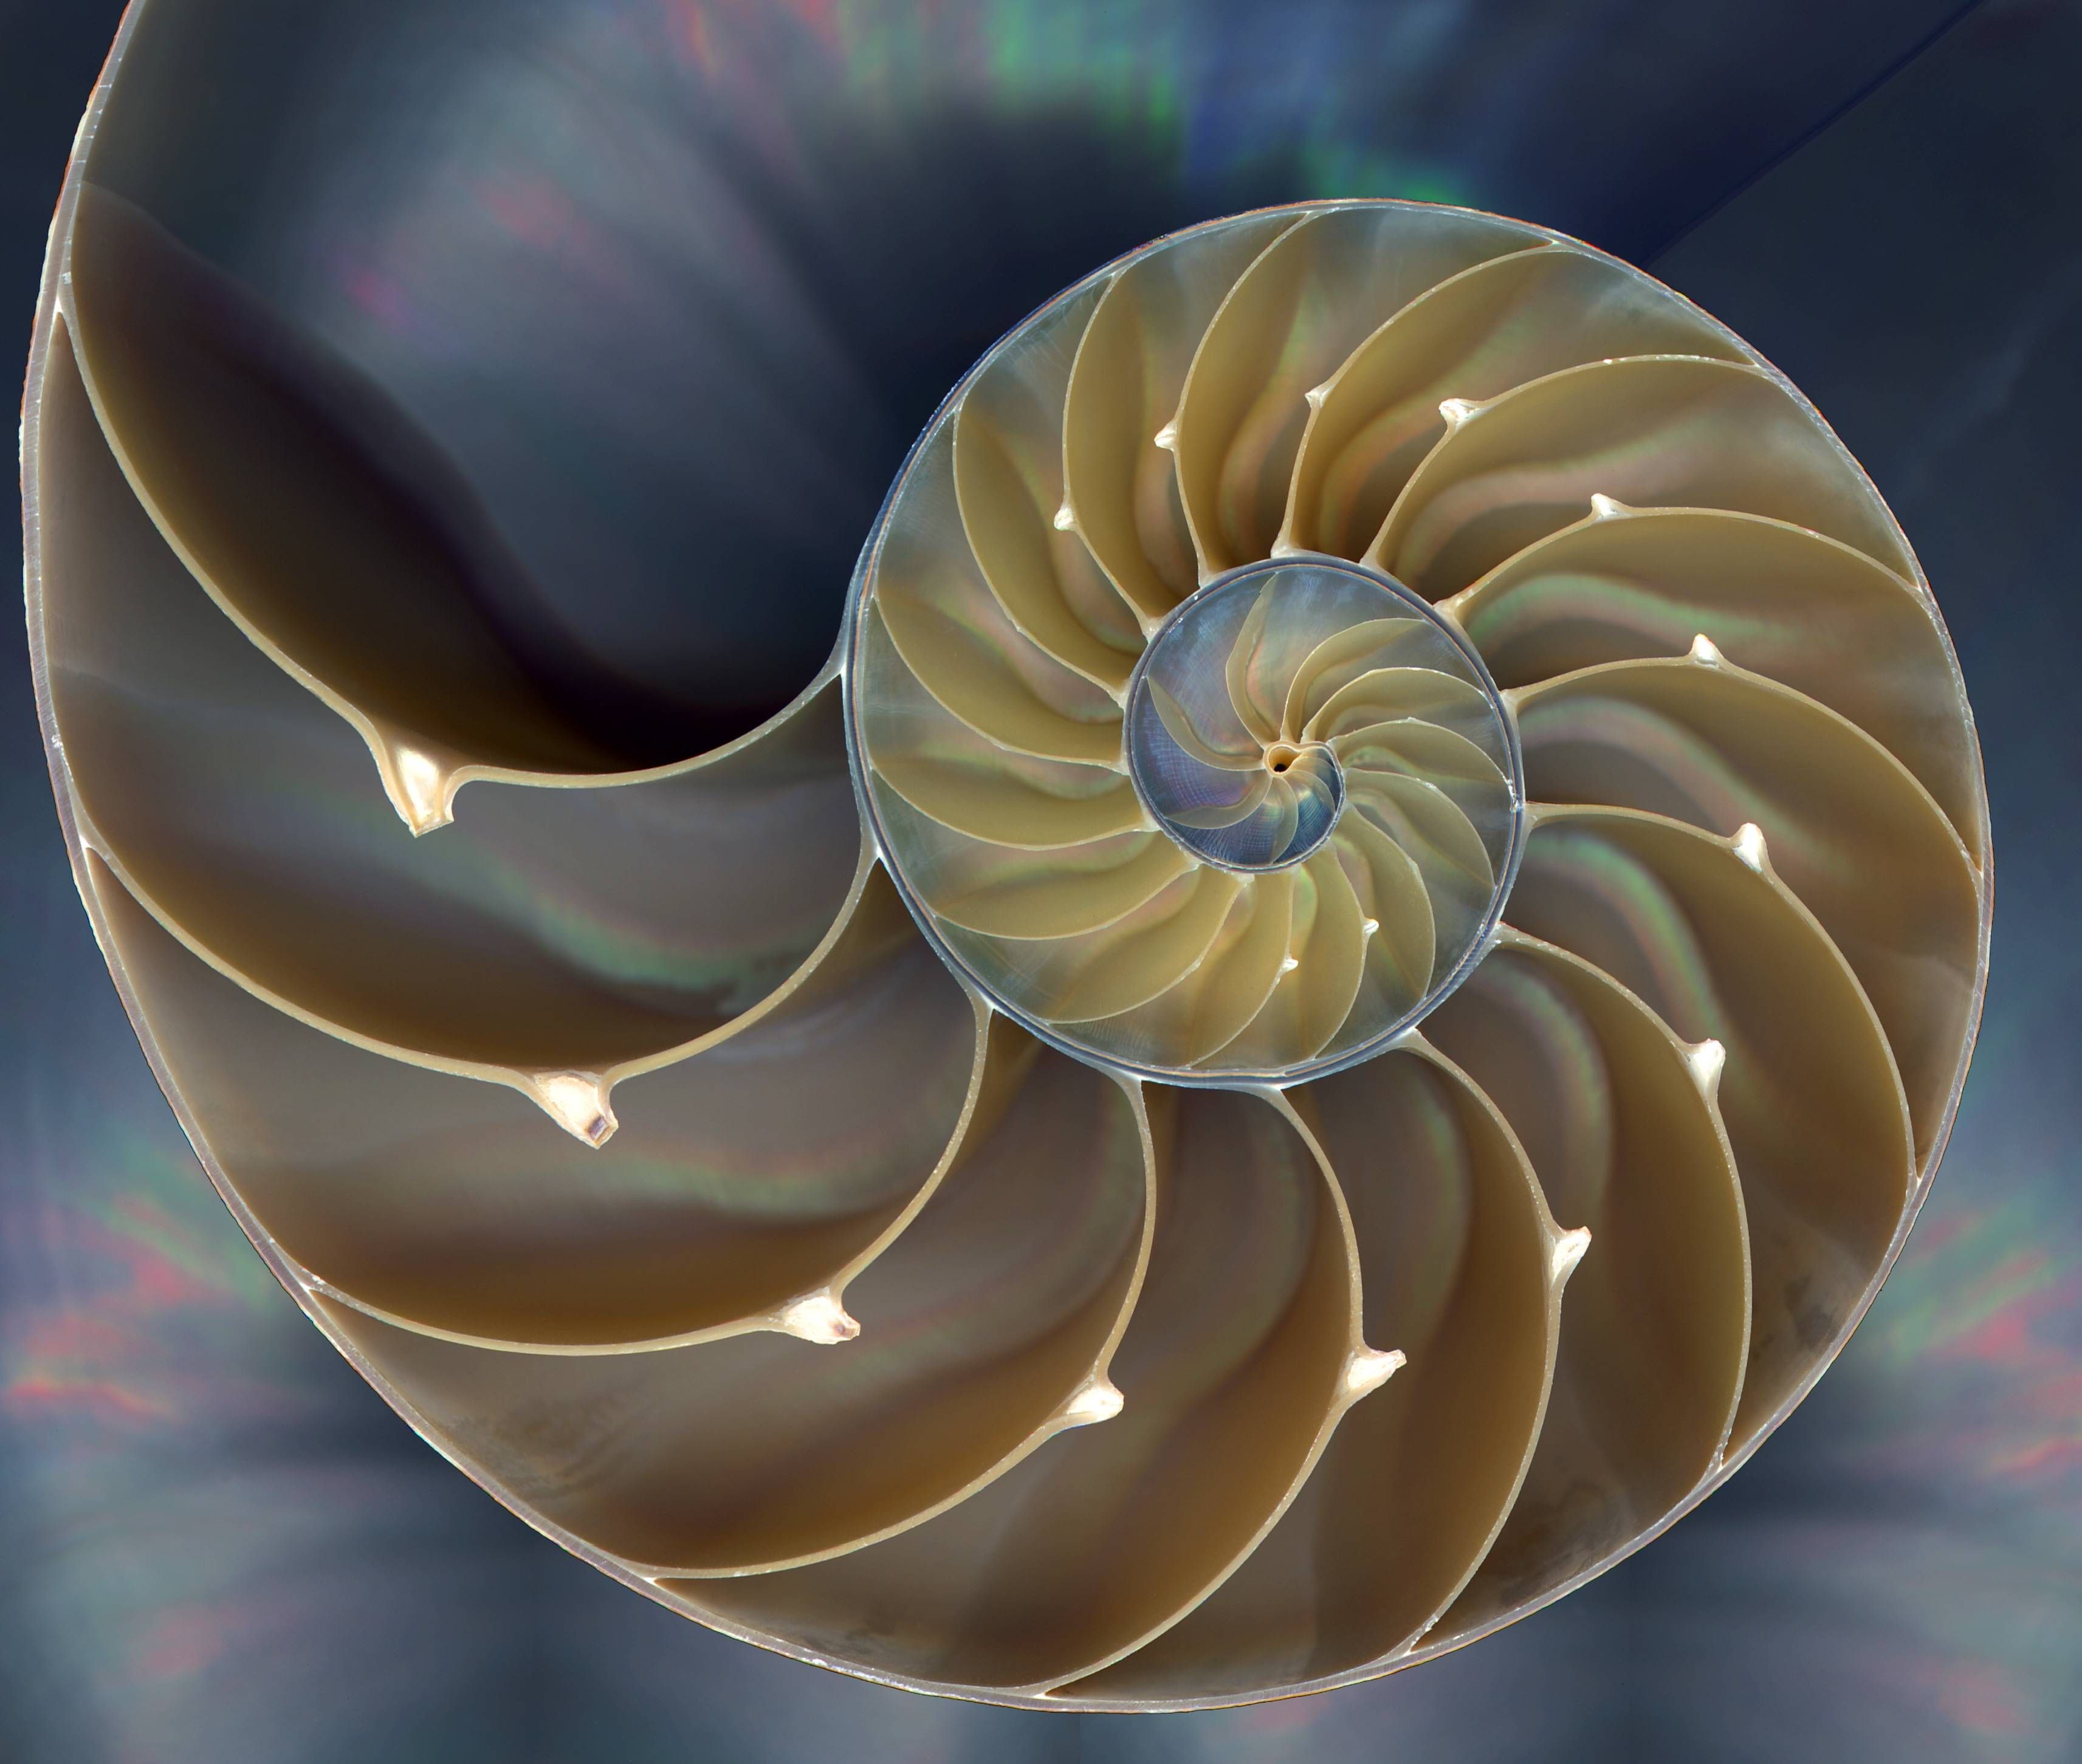 WATCH: What Is The Soul? 13 Definitions To Consider | Nautilus shell ...